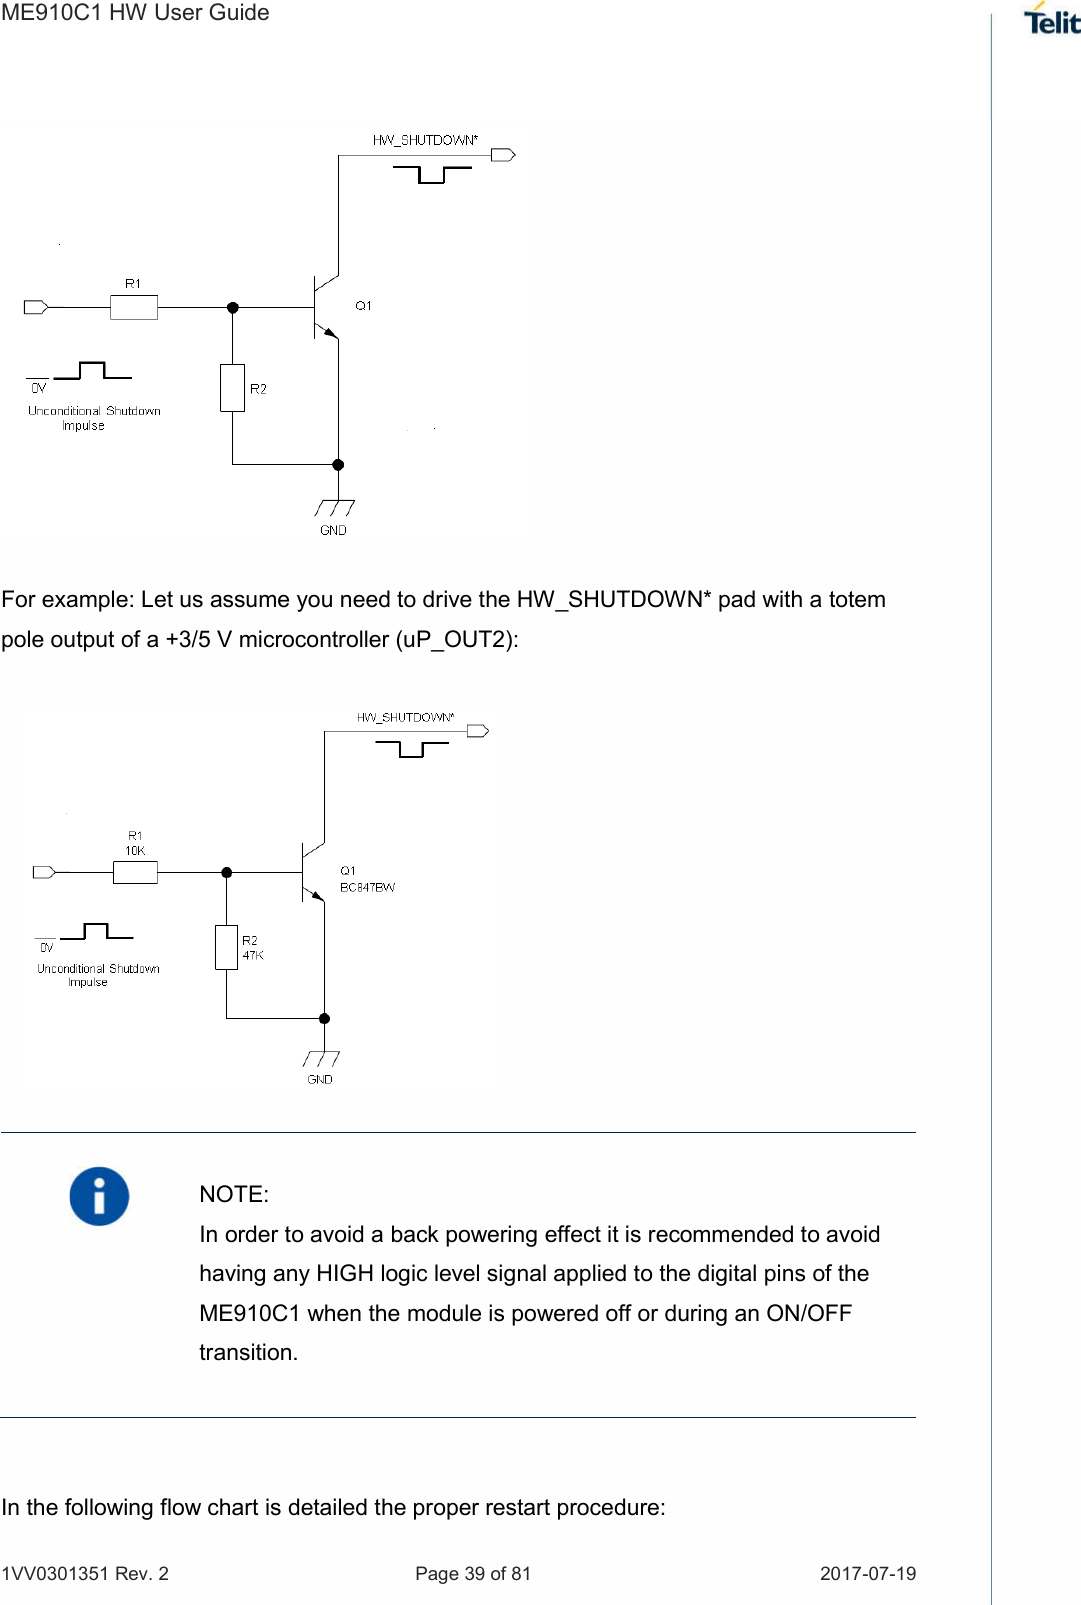 ME910C1 HW User Guide 1VV0301351 Rev. 2  Page 39 of 81  2017-07-19                        For example: Let us assume you need to drive the HW_SHUTDOWN* pad with a totem pole output of a +3/5 V microcontroller (uP_OUT2):               In the following flow chart is detailed the proper restart procedure:   NOTE: In order to avoid a back powering effect it is recommended to avoid having any HIGH logic level signal applied to the digital pins of the ME910C1 when the module is powered off or during an ON/OFF transition. 